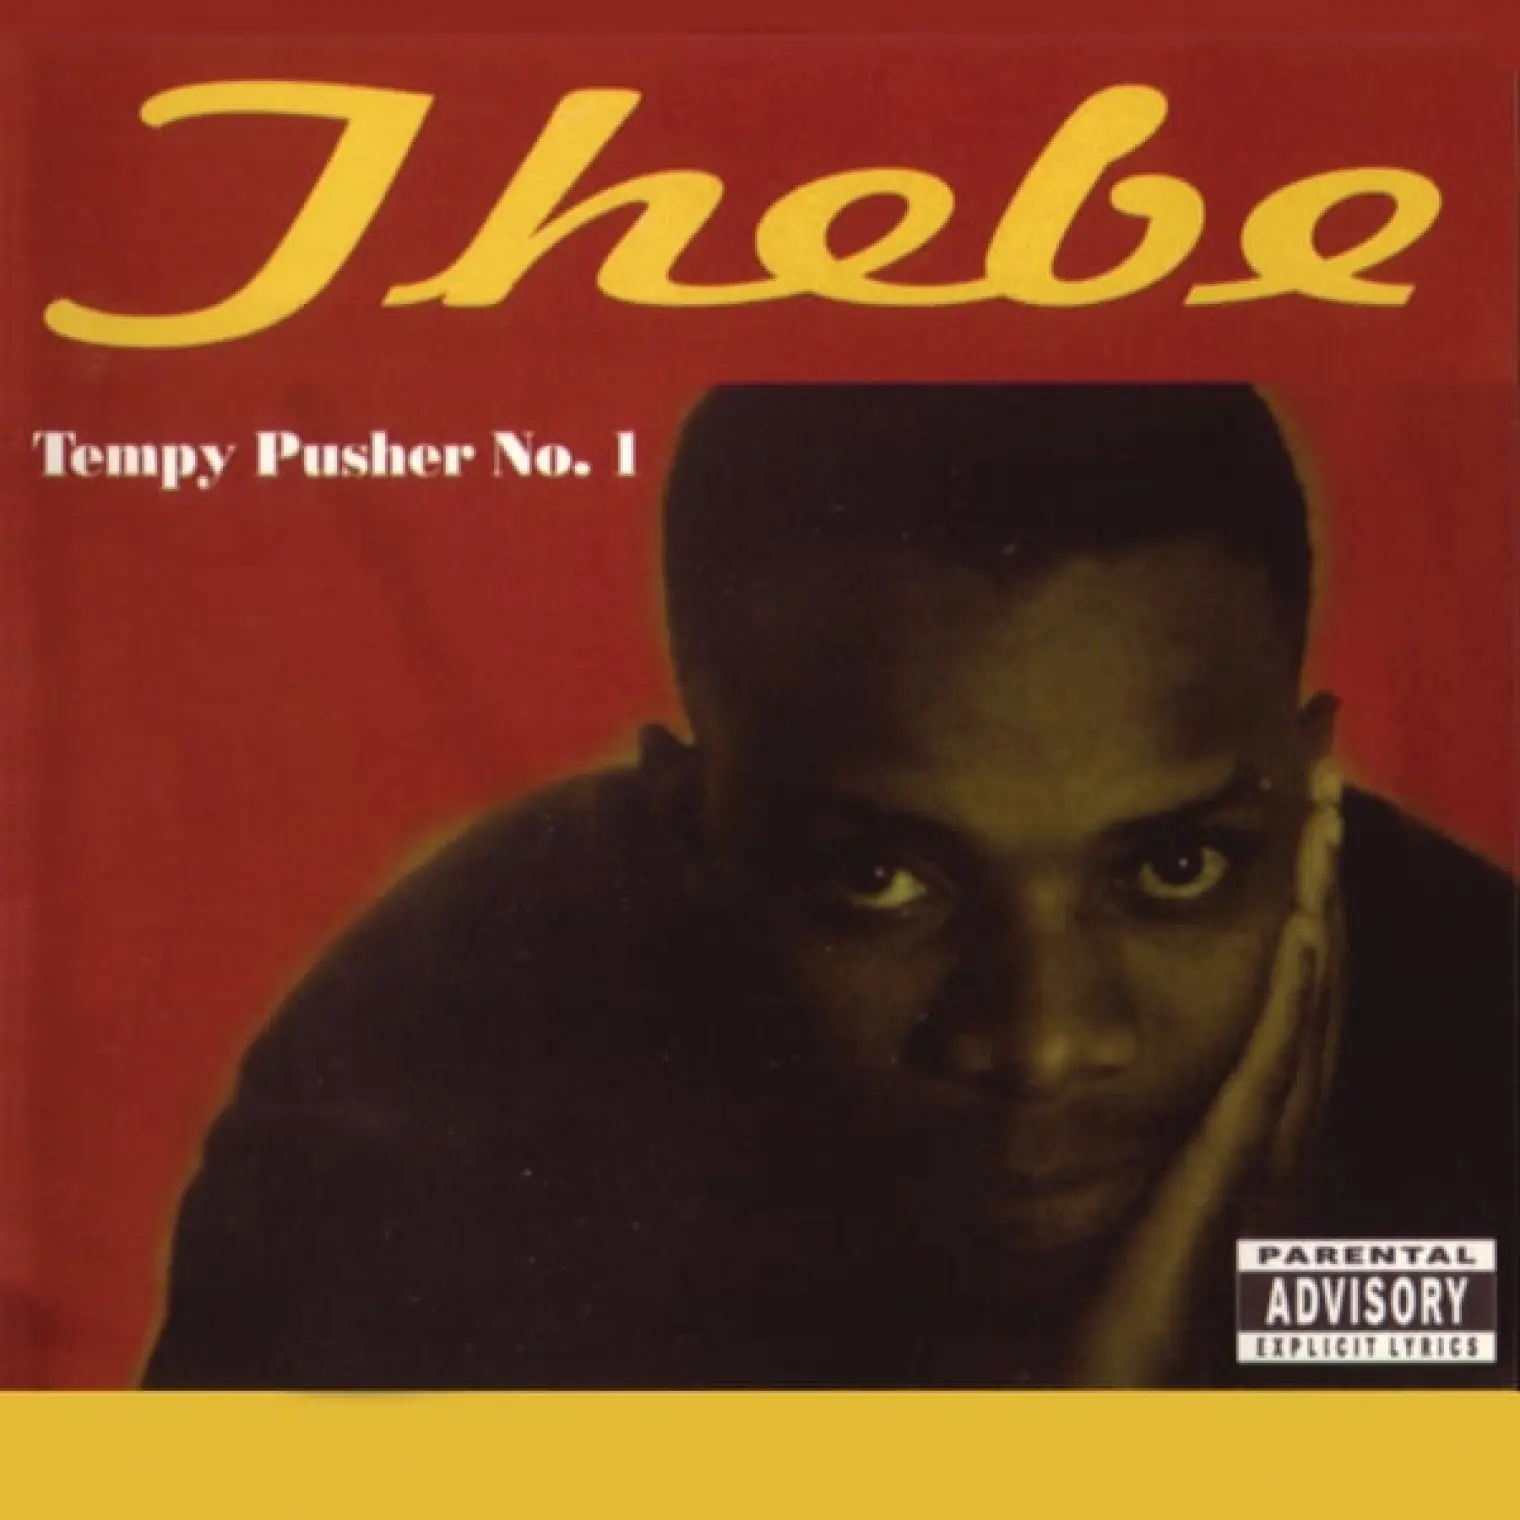 Tempy Pusher No. 1 -  Thebe 